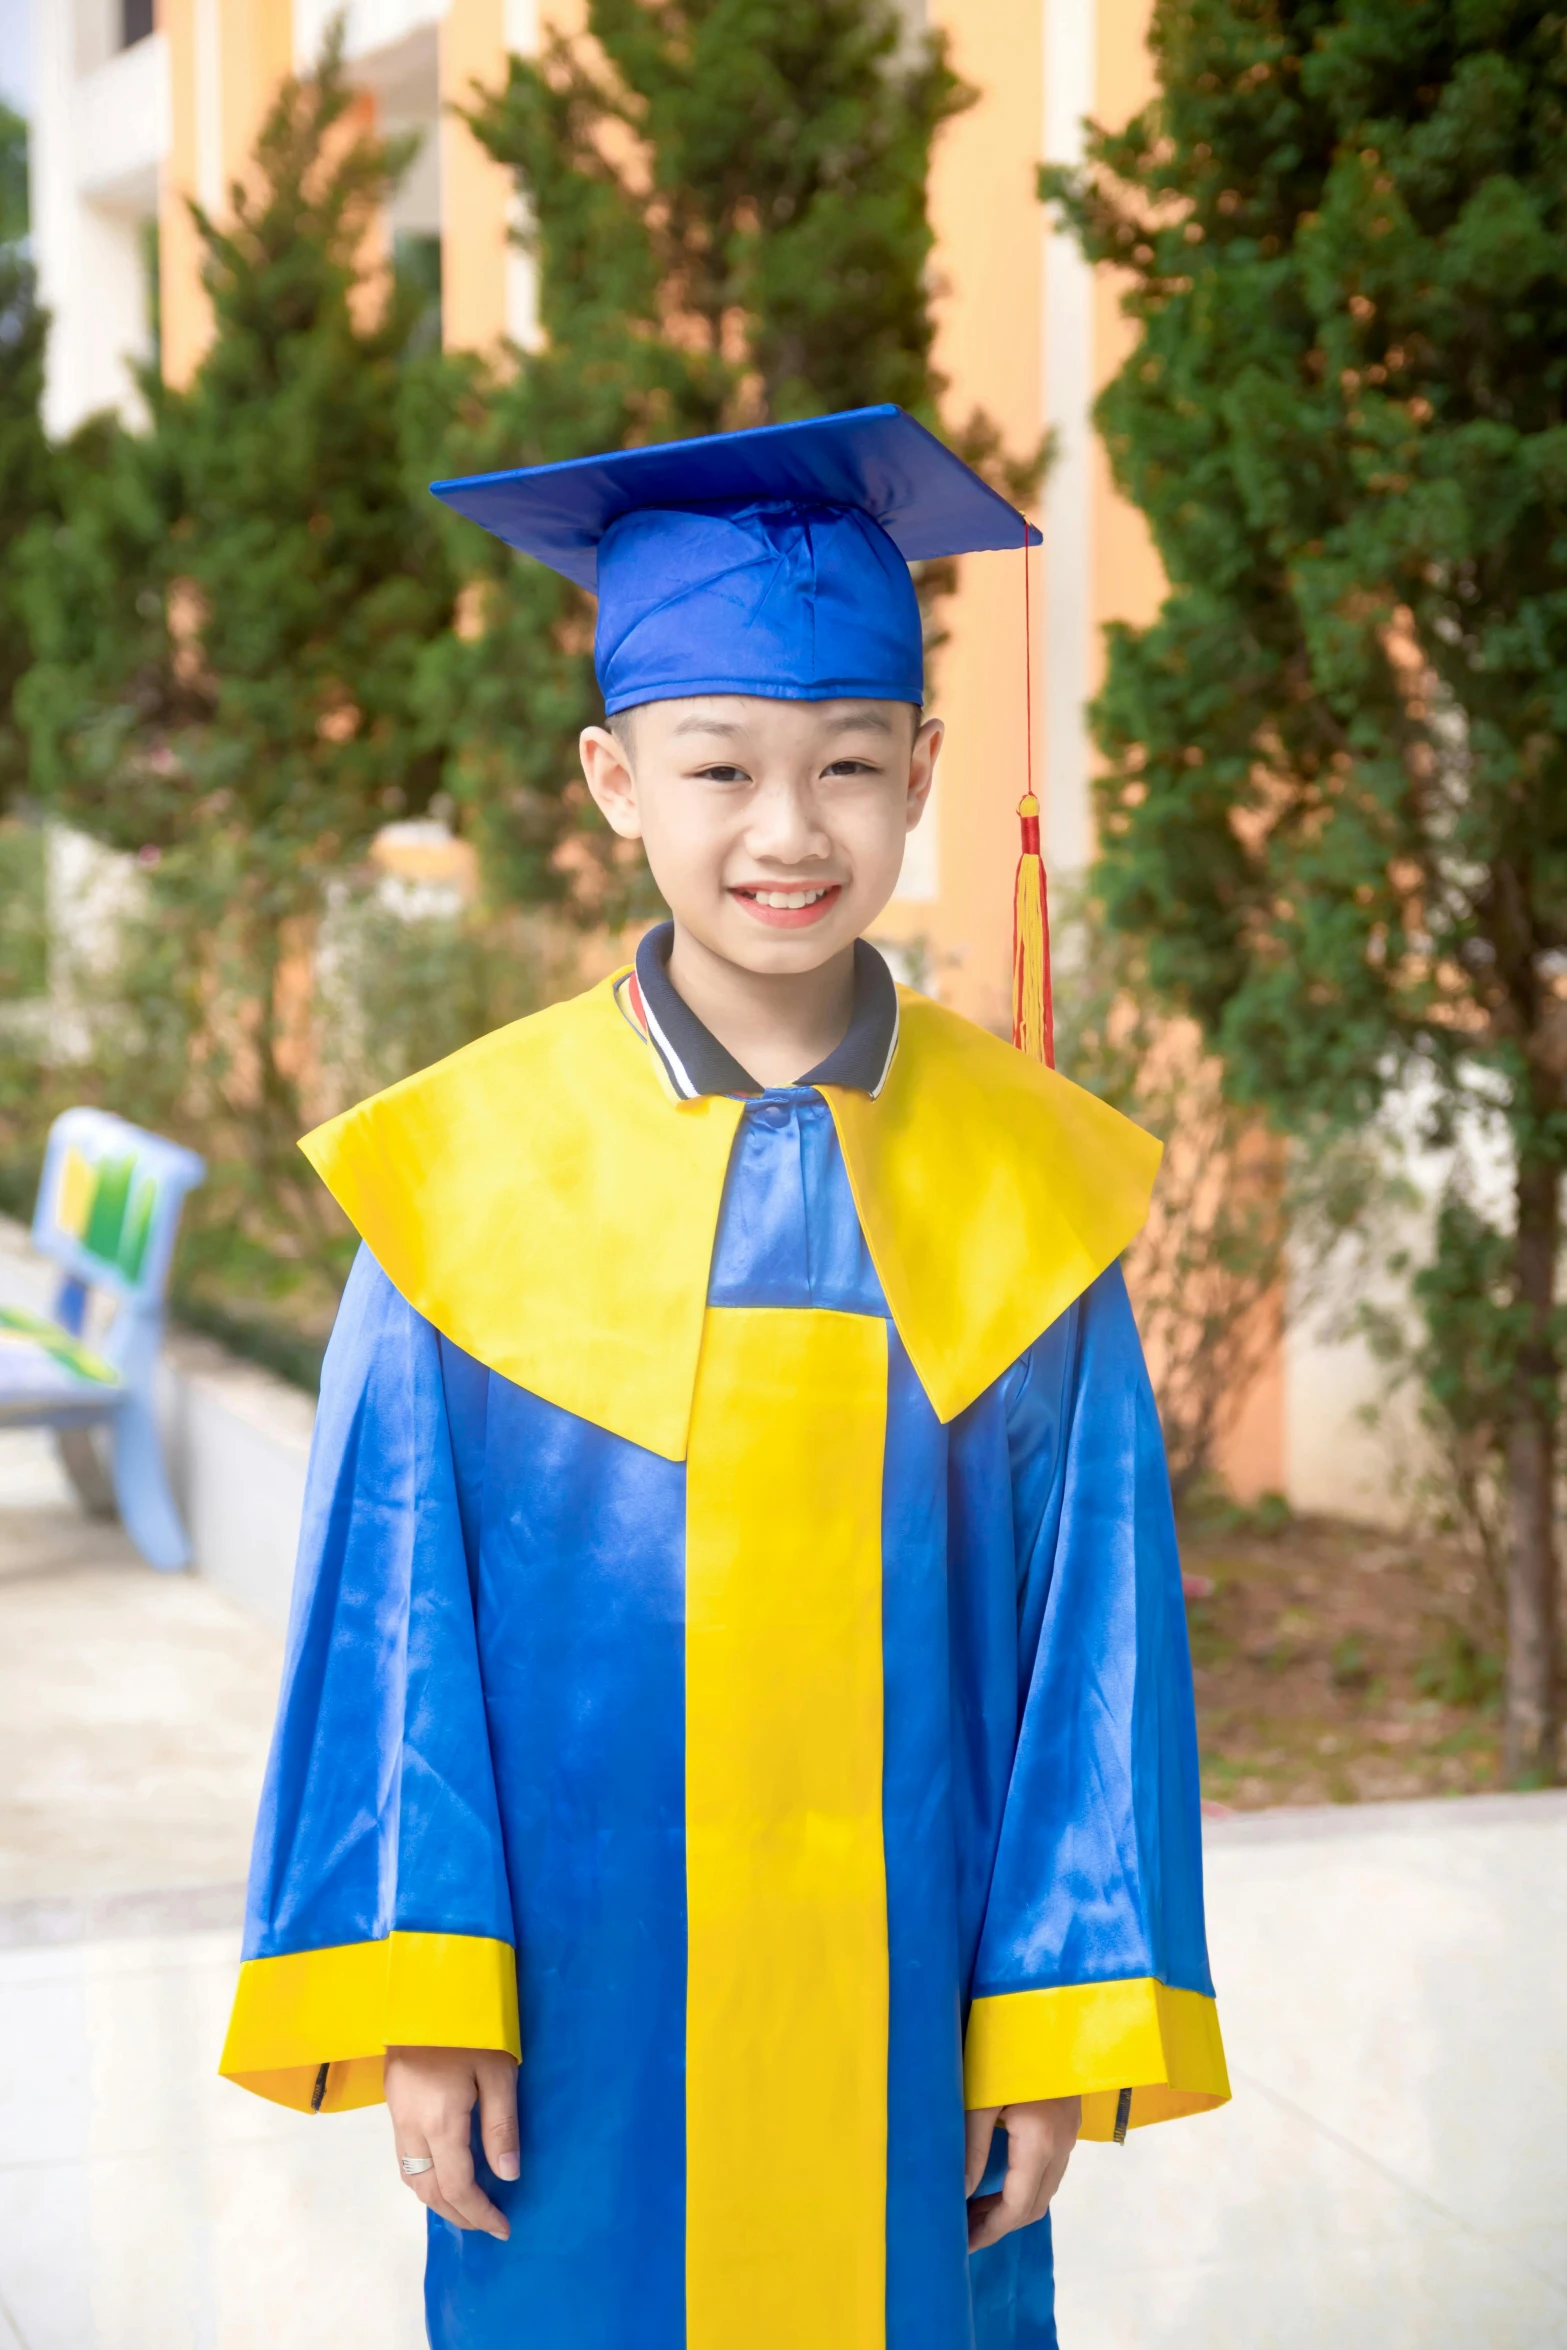 a child in graduation gown and cap is smiling